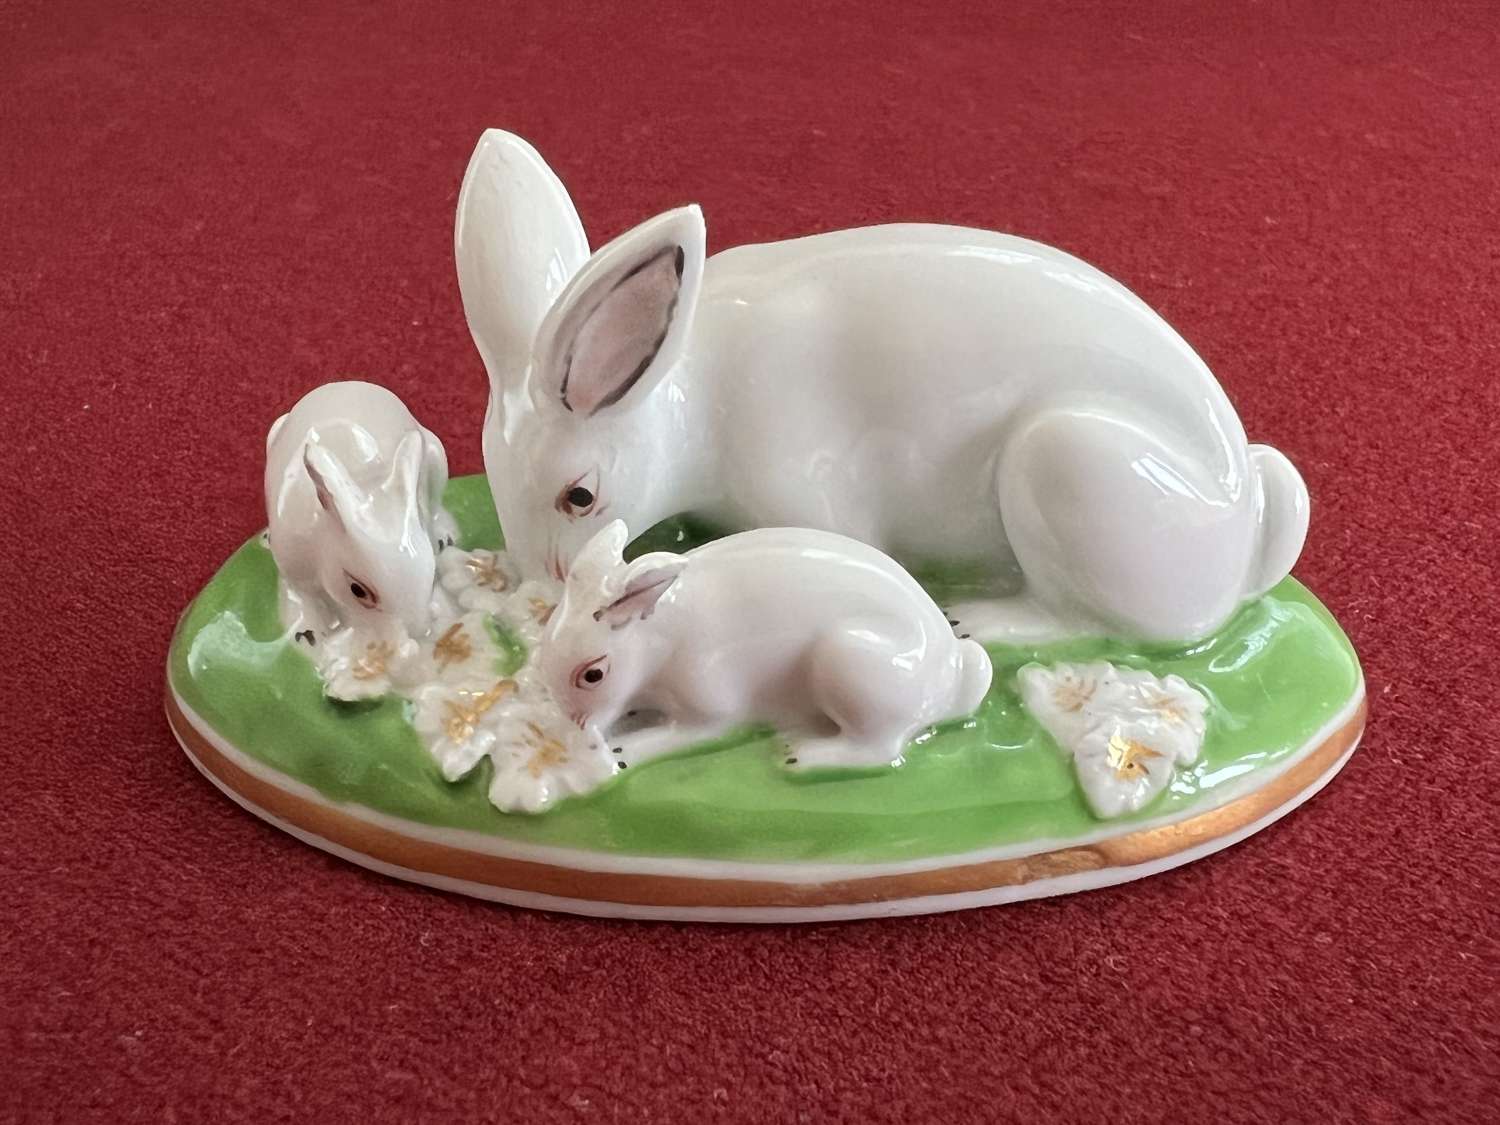 A Chamberlain Worcester porcelain 'Toy' group of Rabbits c.1820-1830